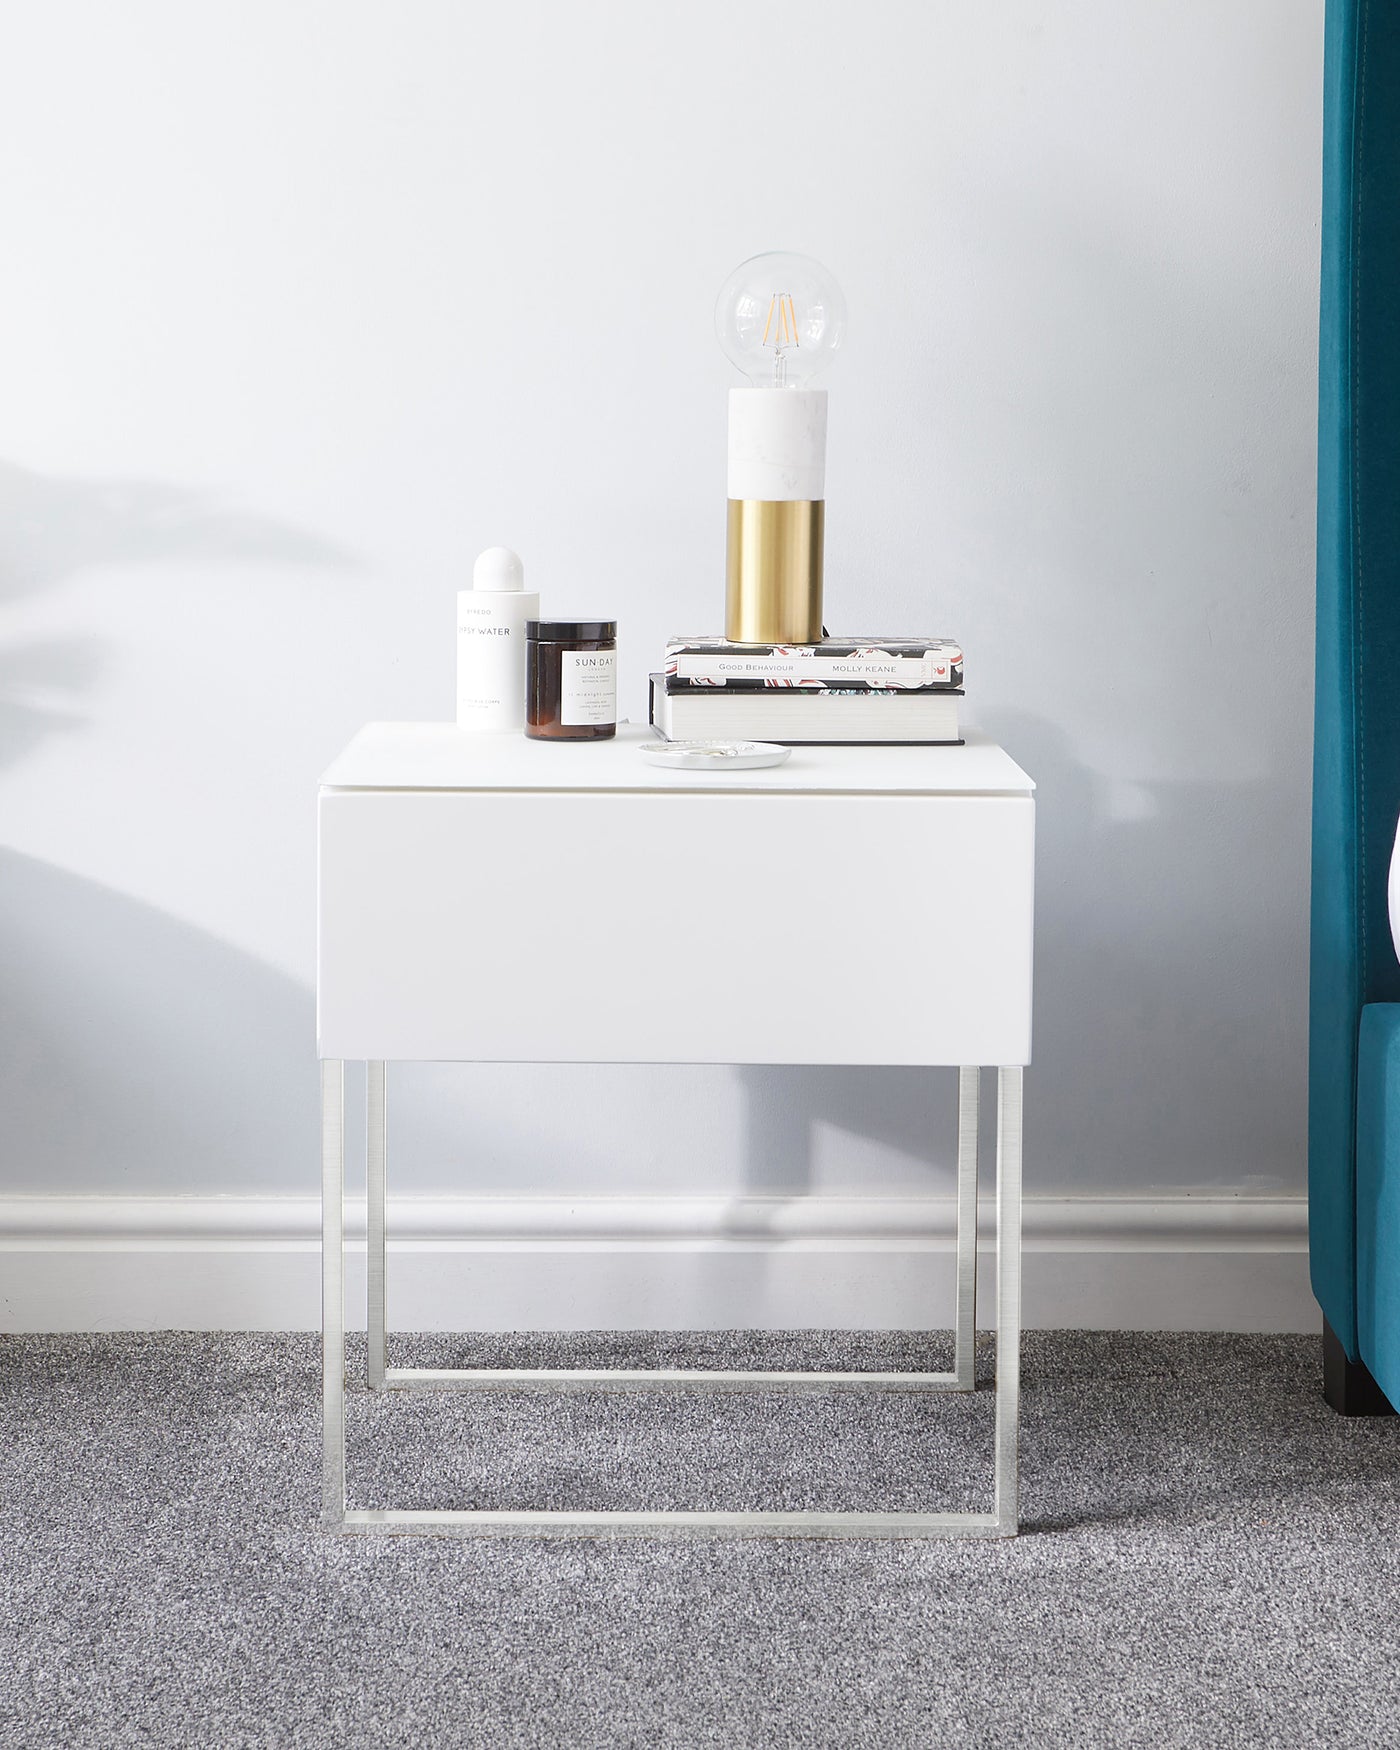 White modern minimalist nightstand with a single drawer, featuring a sleek design with a chrome-finished metal base. The tabletop is adorned with a small collection of items, including a lamp with a marble and gold base, as well as a stack of books and decorative jars.